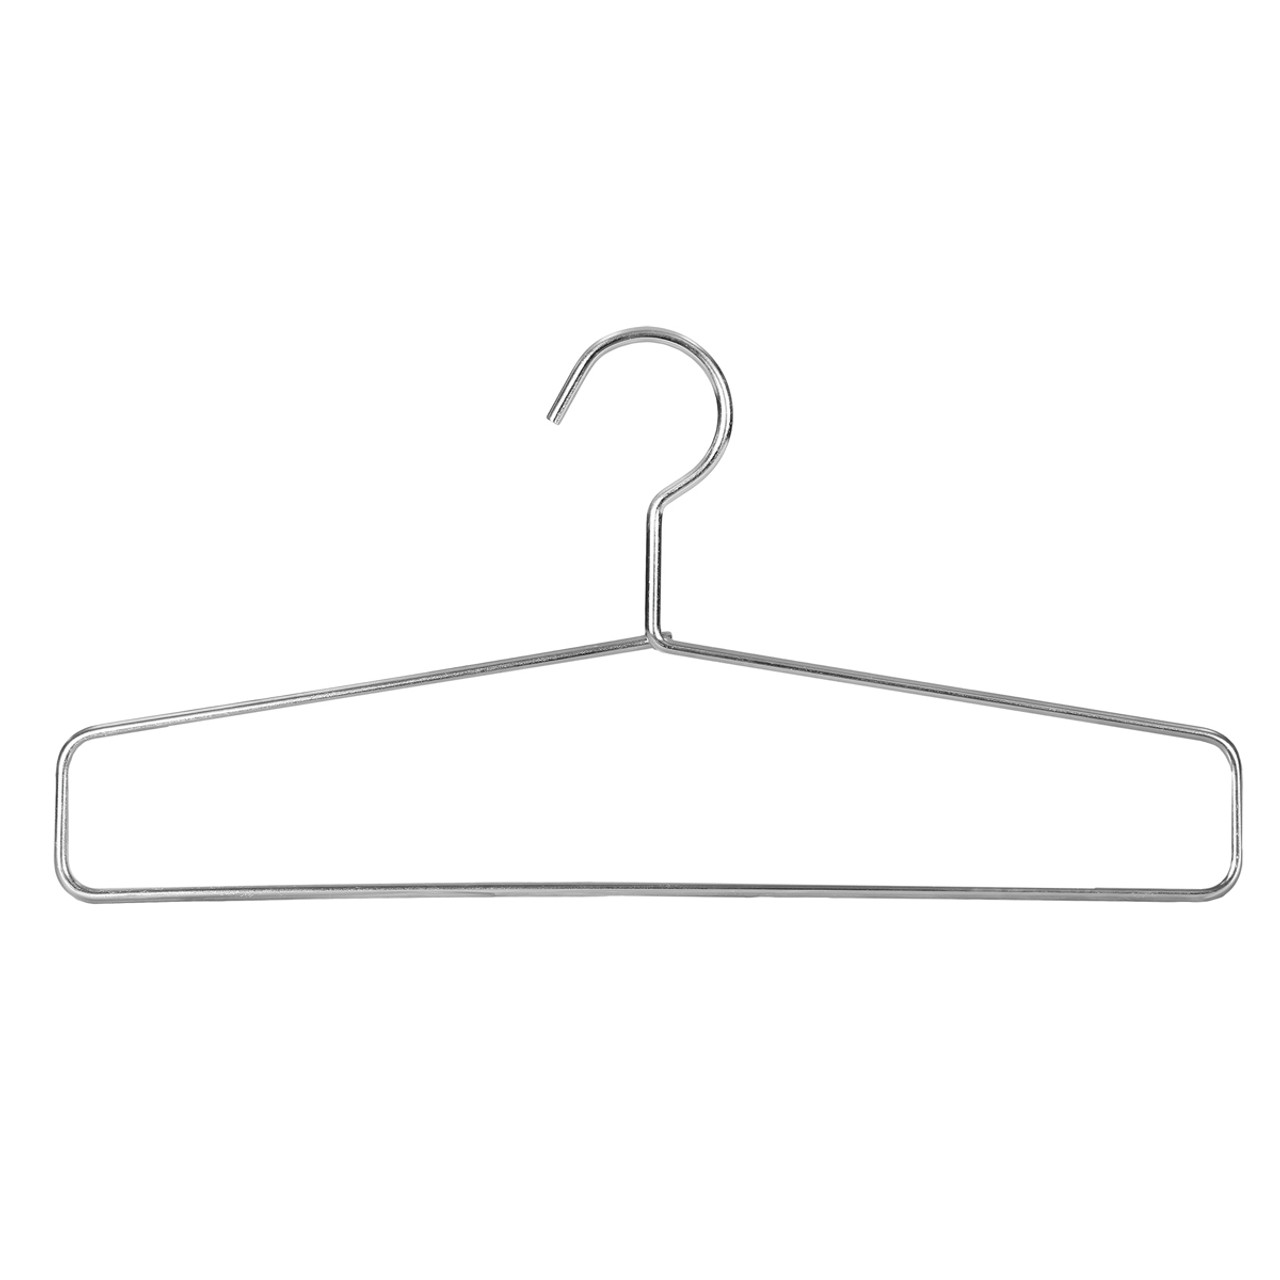 https://cdn11.bigcommerce.com/s-mw2ustcglh/images/stencil/1280x1280/products/2960/5393/groves-ready-rack-flat-dry-hanger-01__62855.1660834095.jpg?c=1